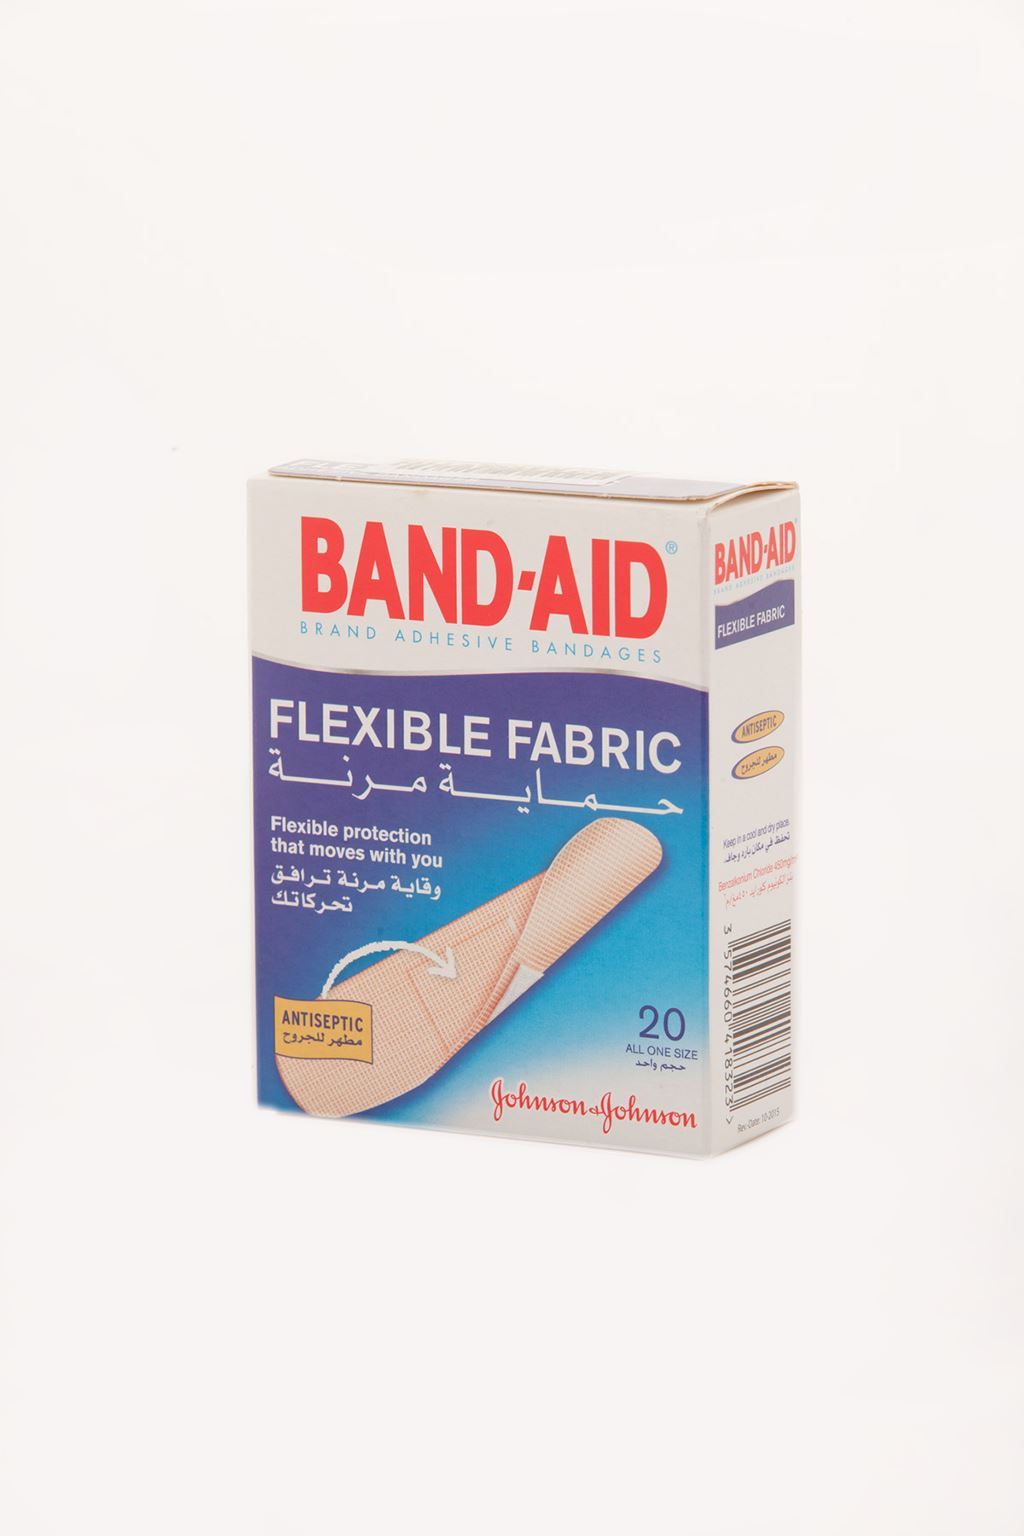 BAND-AID FLEXIBLE FABRIC BANDAGES 20 PIECES